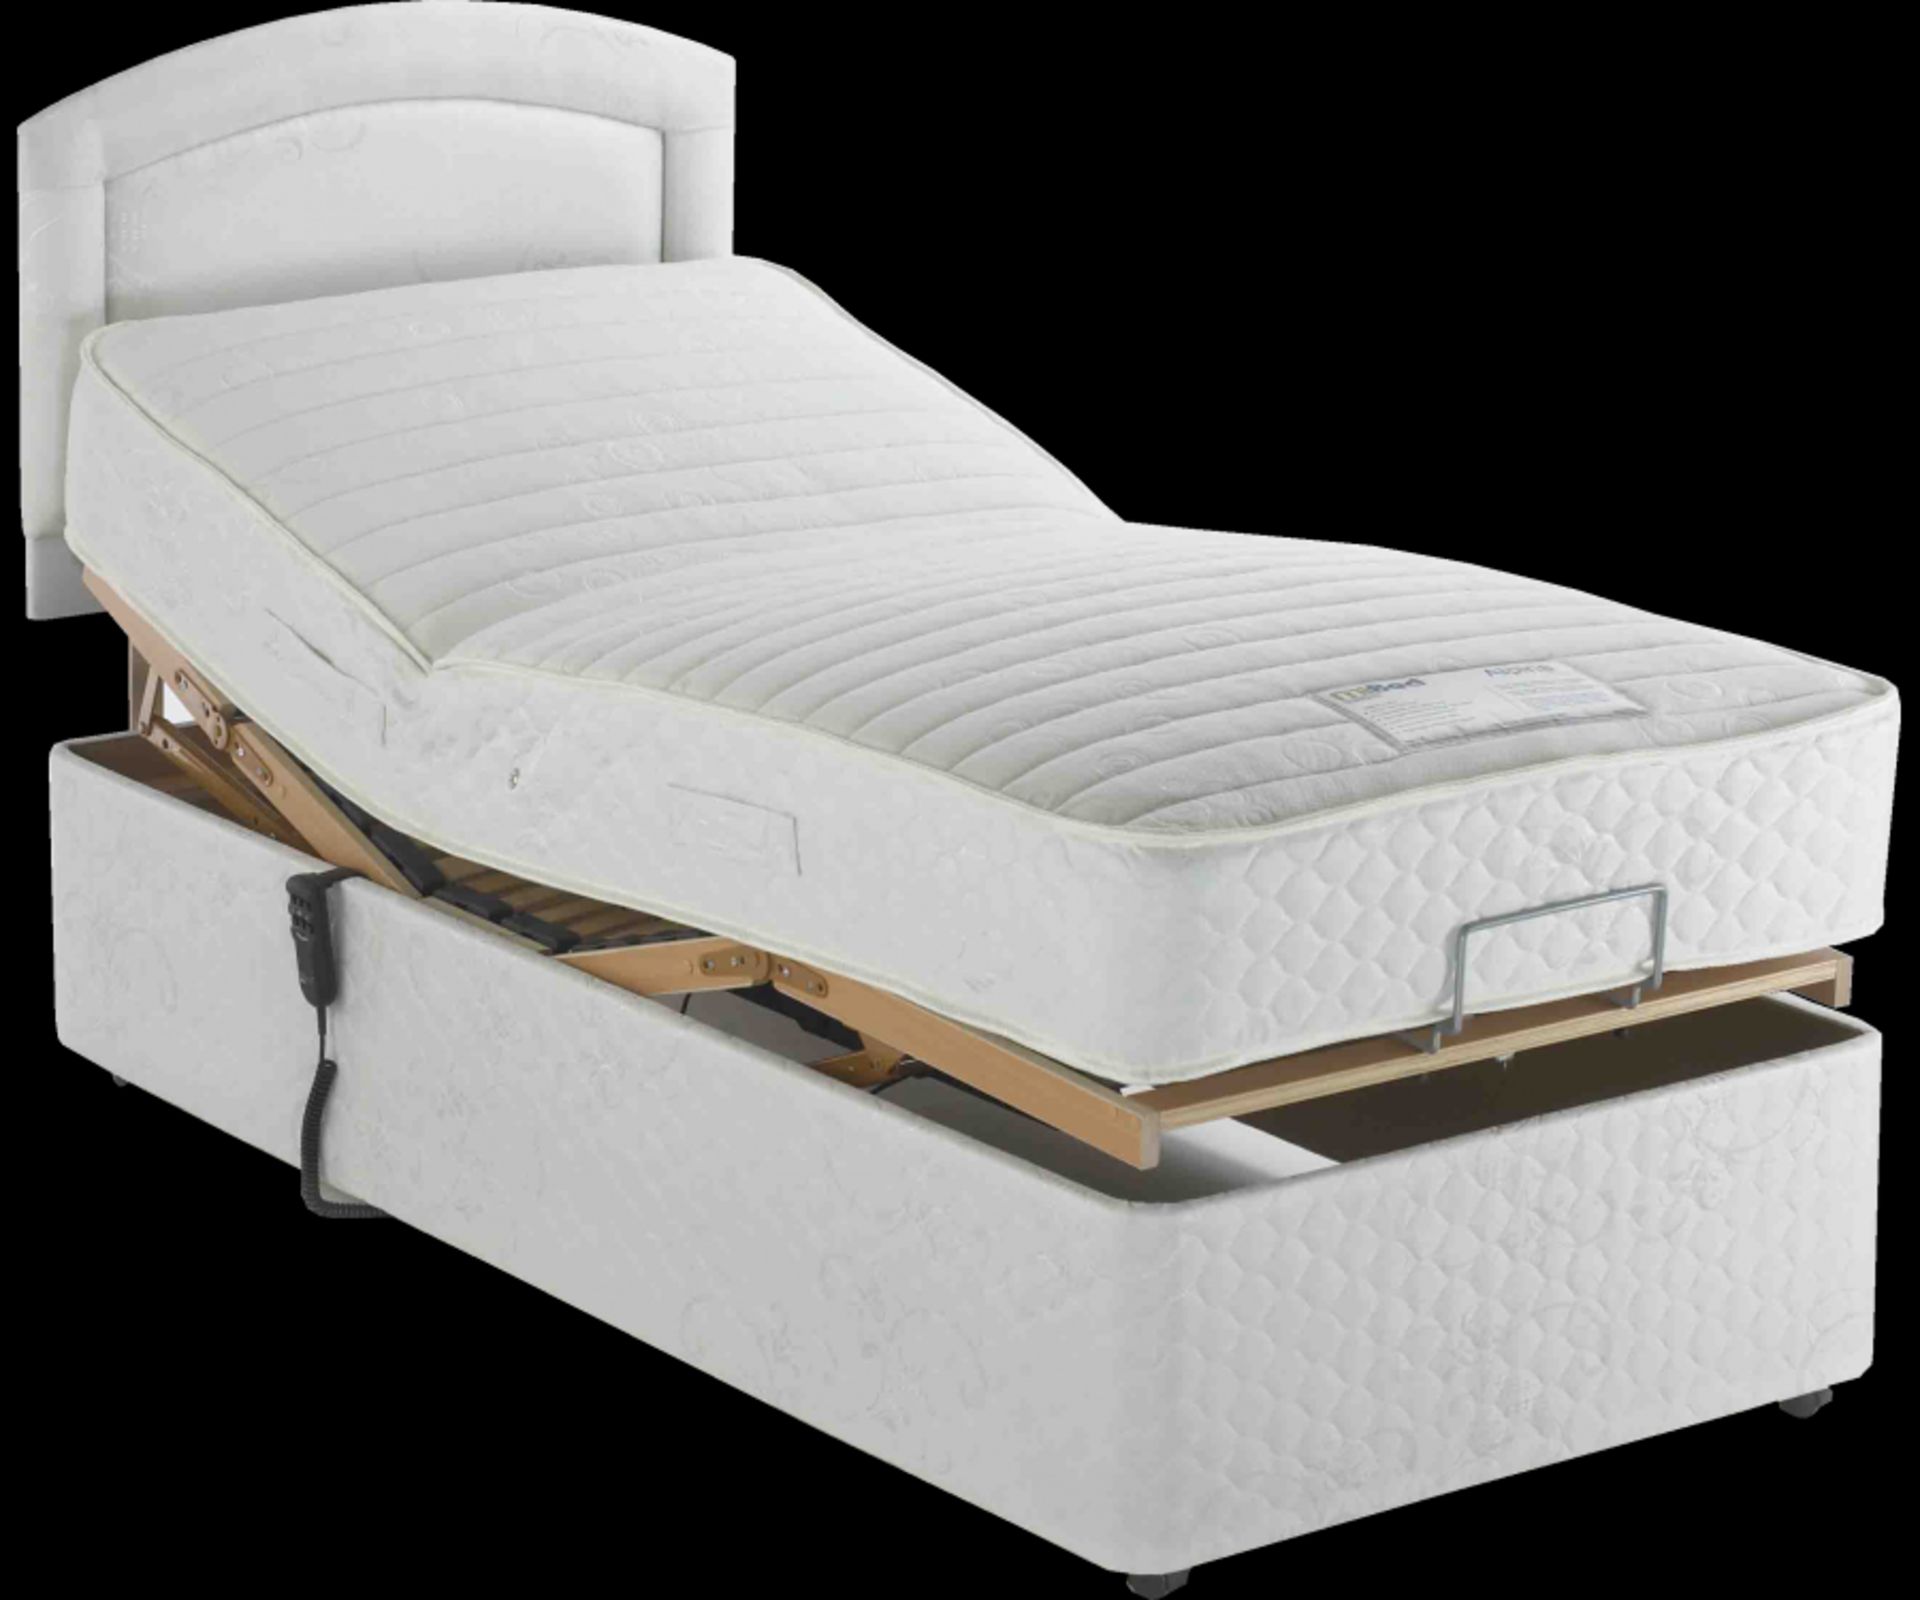 Brand New 3'0 (Single) Electric Adjustable Bed With 1000 Pocket Sprung Mattress - Image 2 of 2